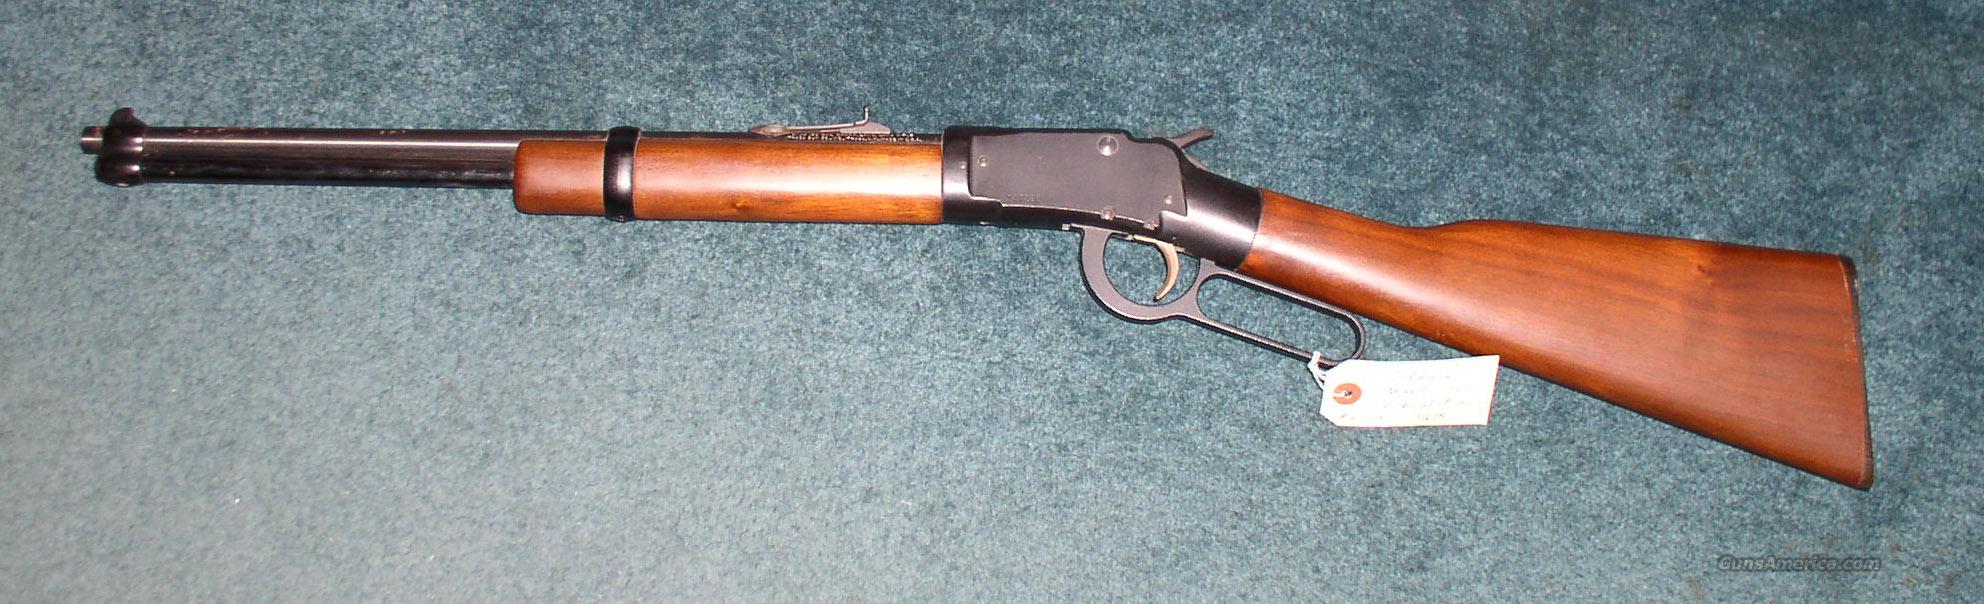 ithaca model 49 lever action 22